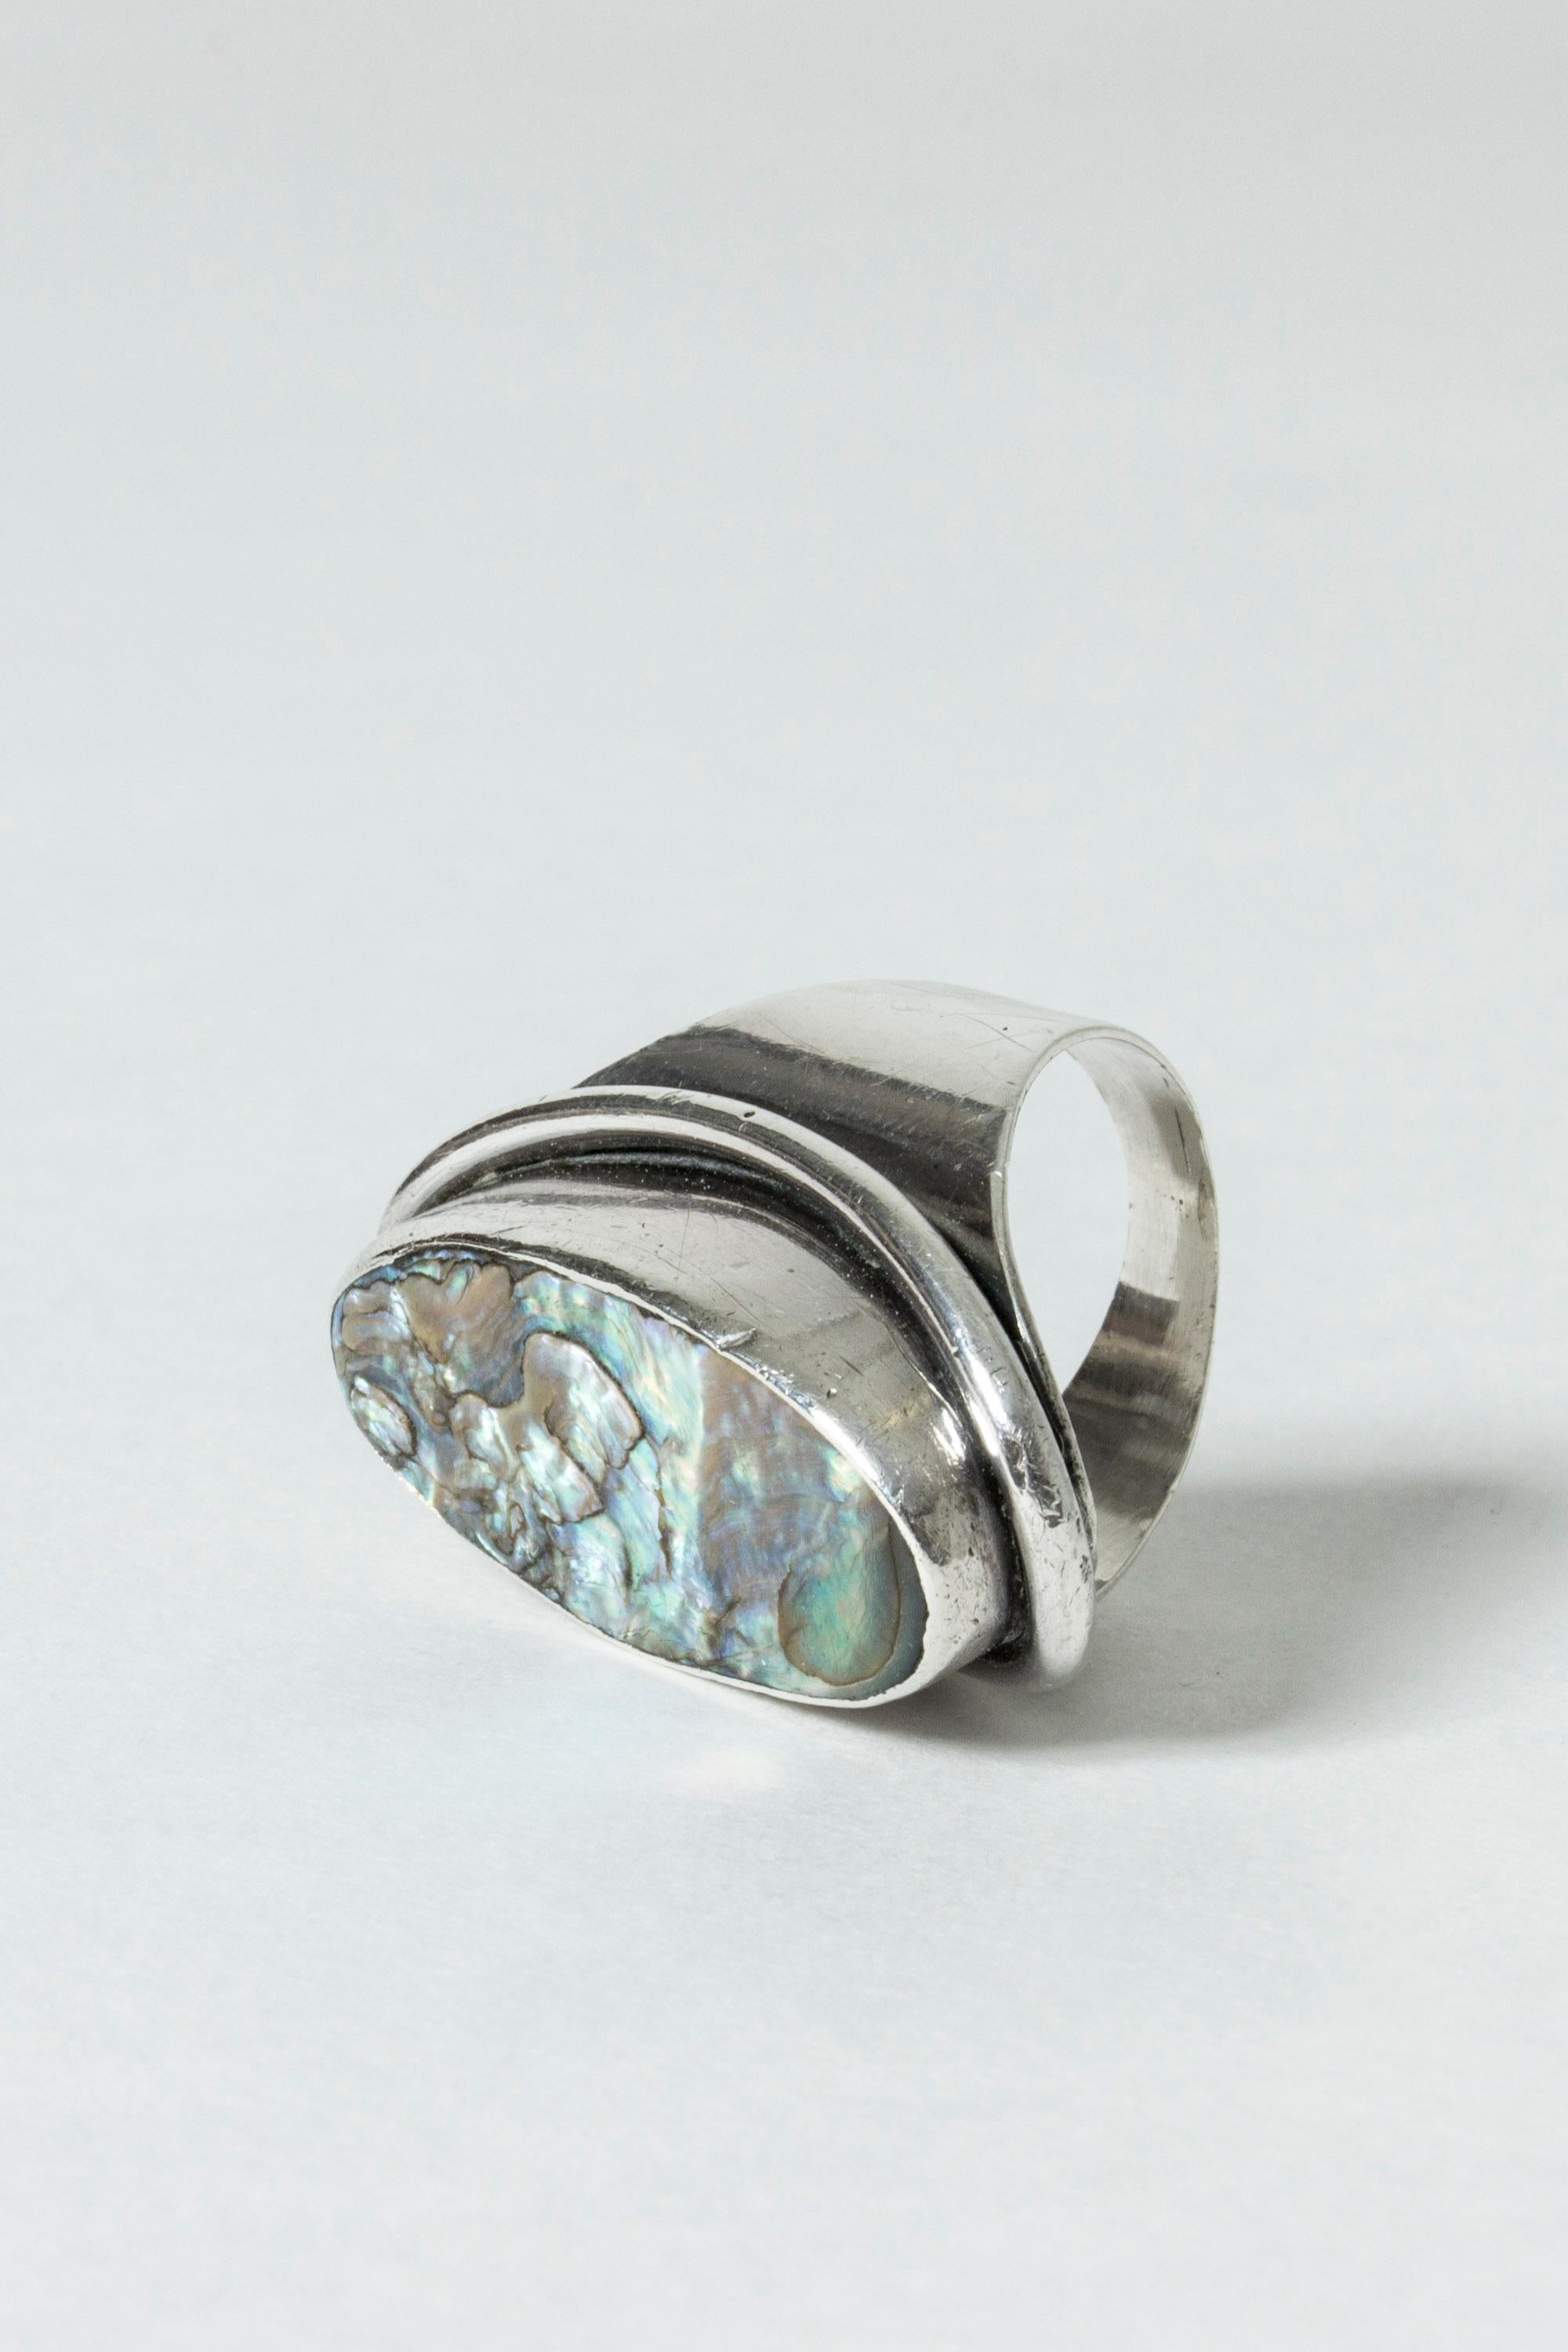 Modernist Silver and Mother of Pearl Ring by Carl Ove Frydensberg, Denmark, 1960s